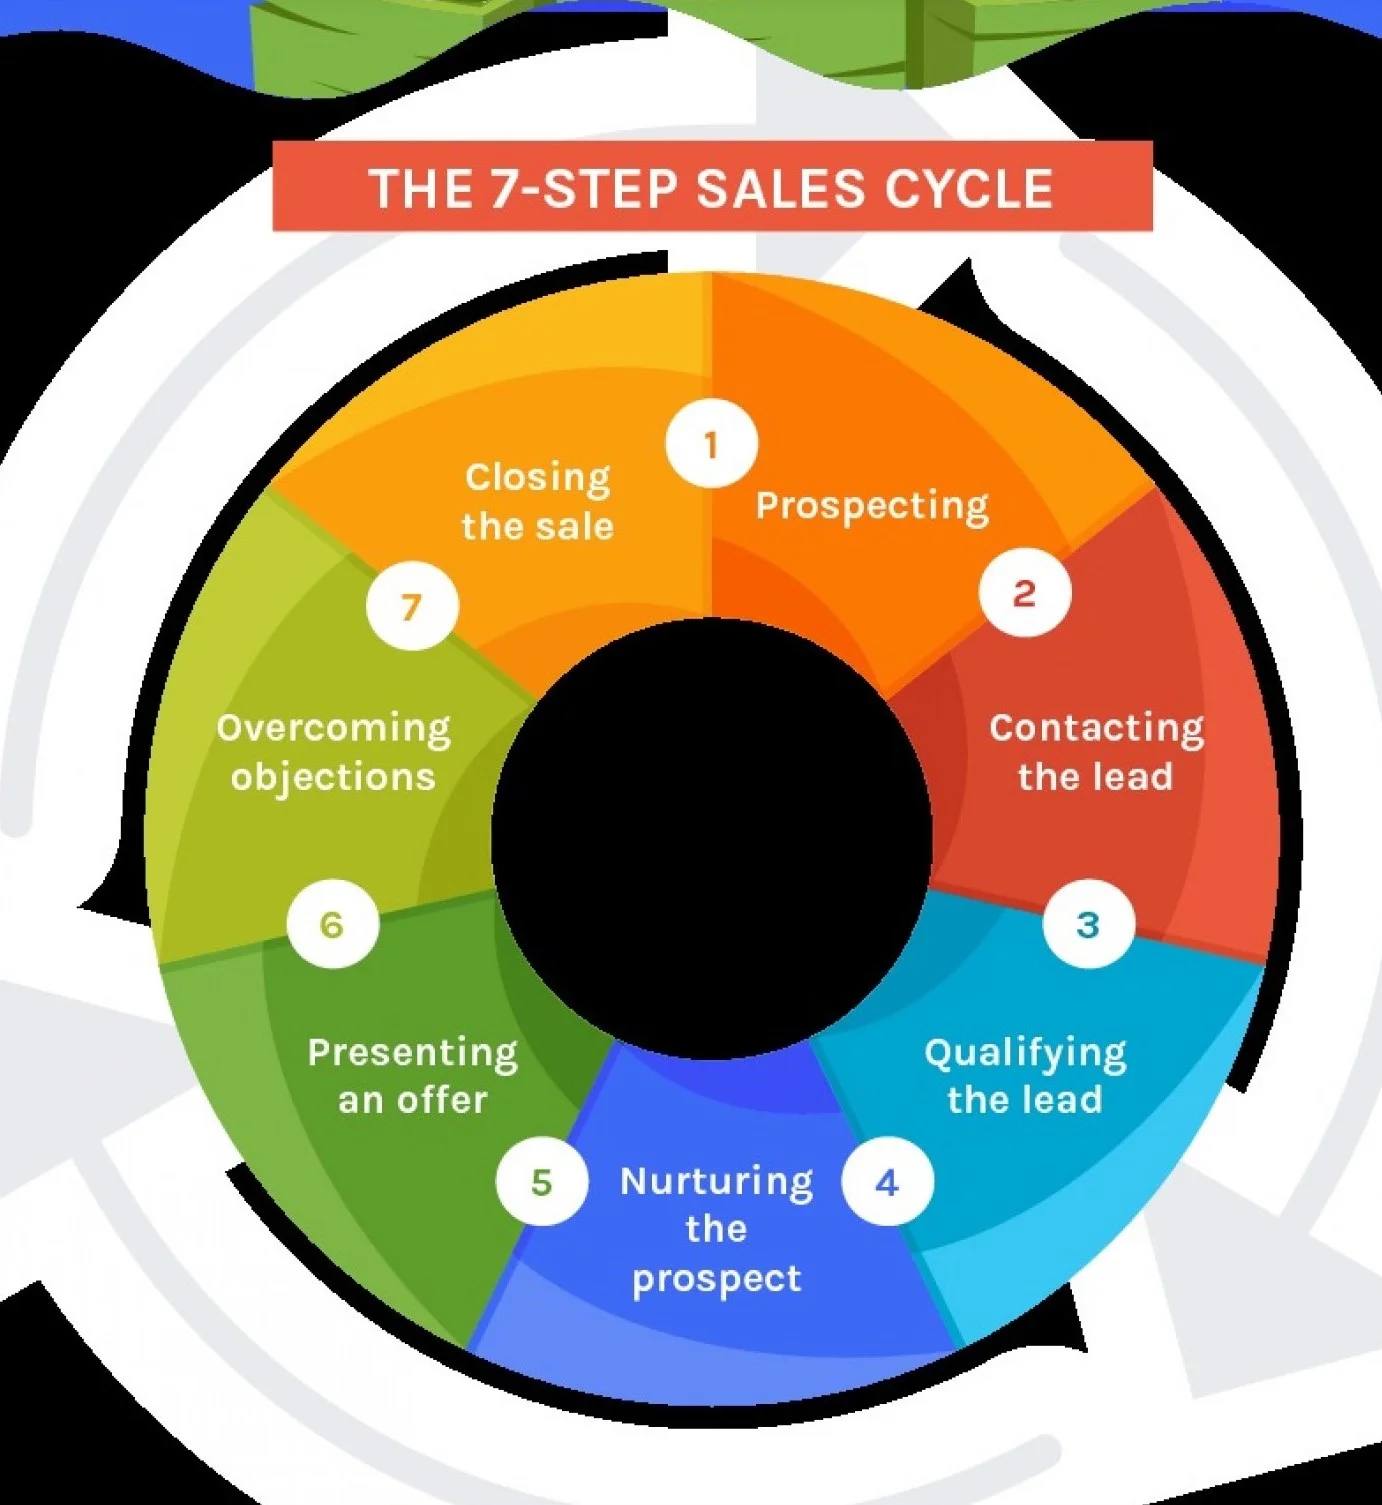 How to close sales faster and accelerate your sales cycle